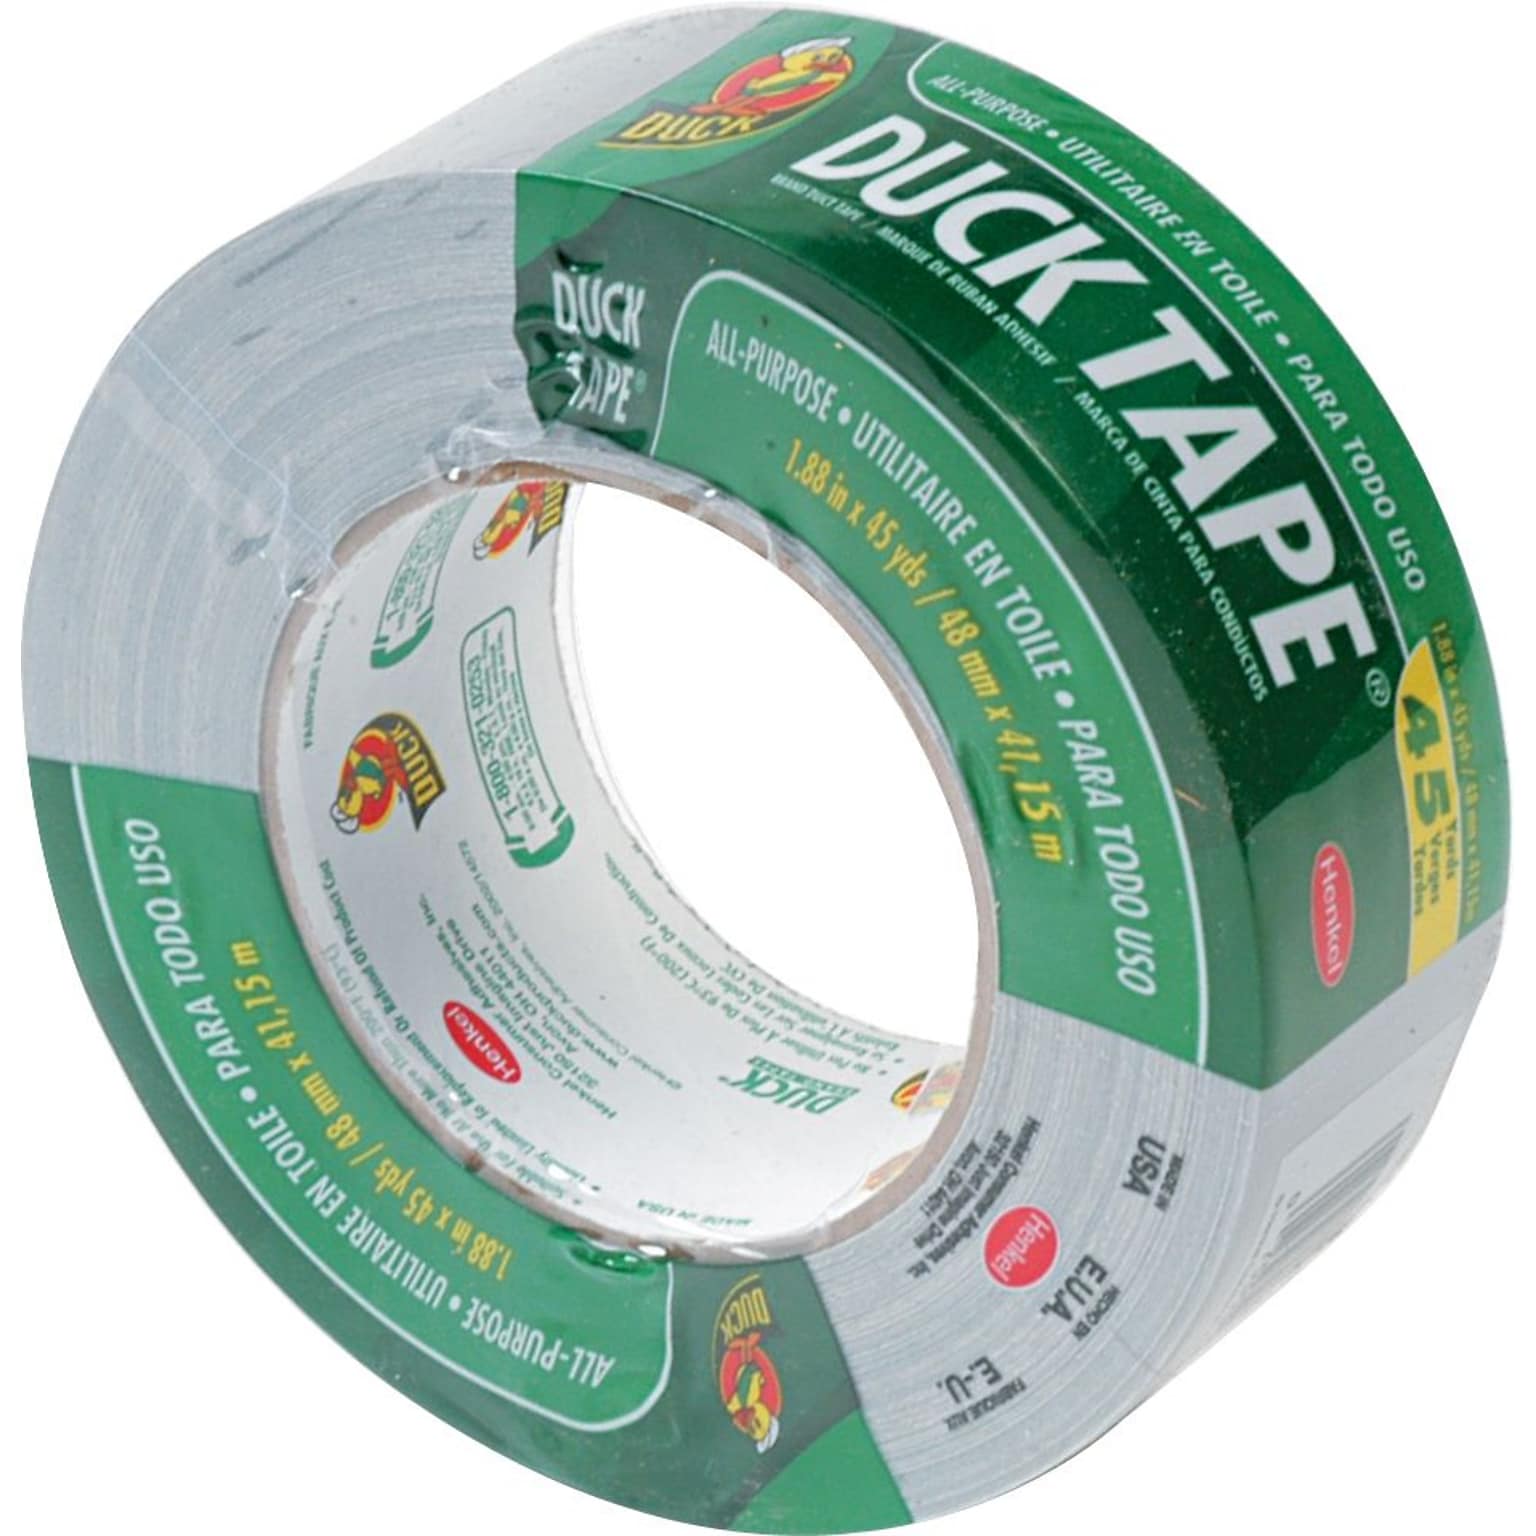 Duck® Duct Tape, 3 Core, Gray, 1.88 x 45 Yards, 1/Rl